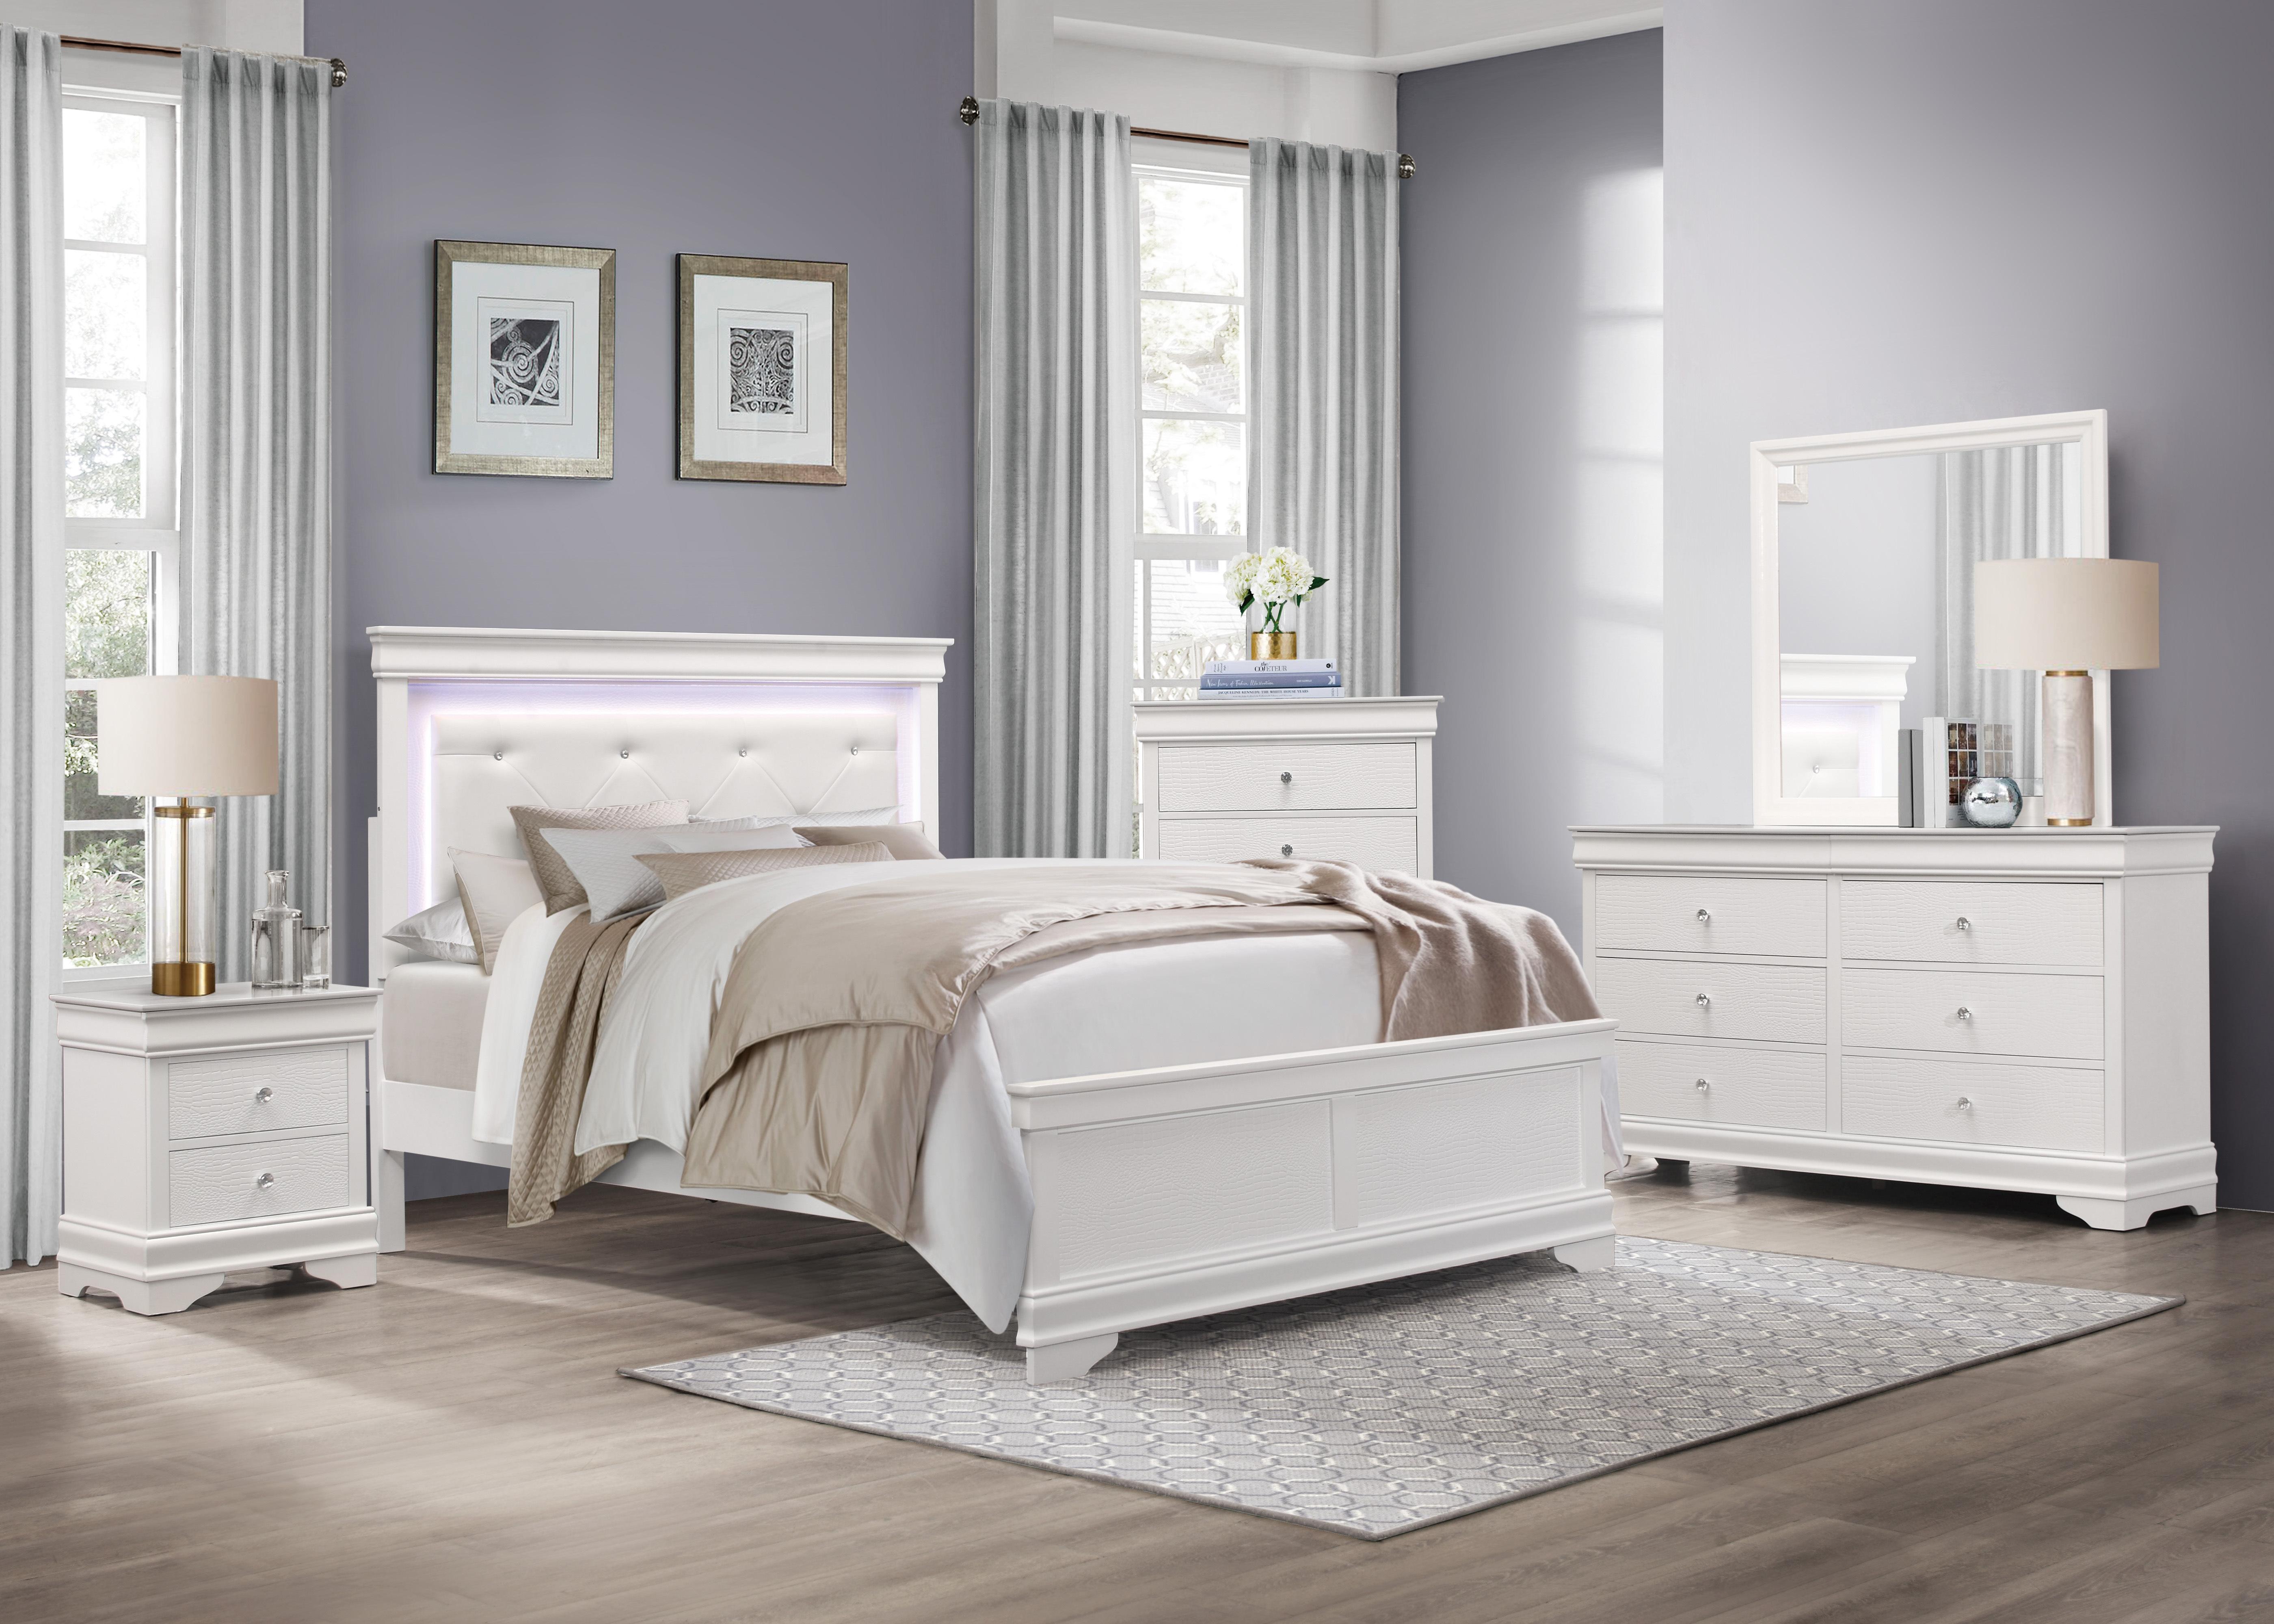 Traditional Bedroom Set 1556WT-1-6PC Lana 1556WT-1-6PC in White Faux Leather